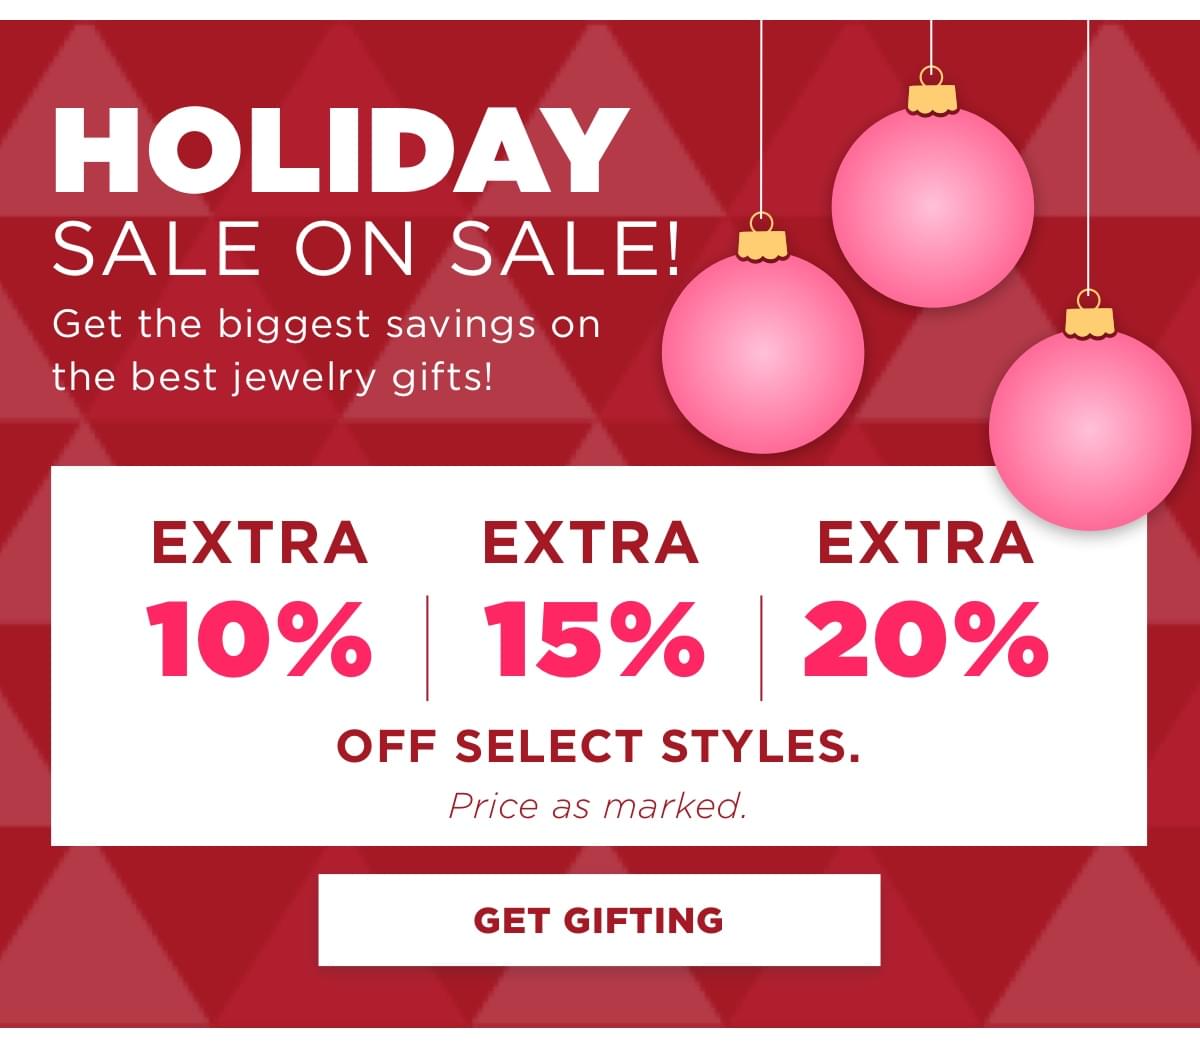 Holiday sale: Extra 10%, 15% and 20% off select styles. Price as marked